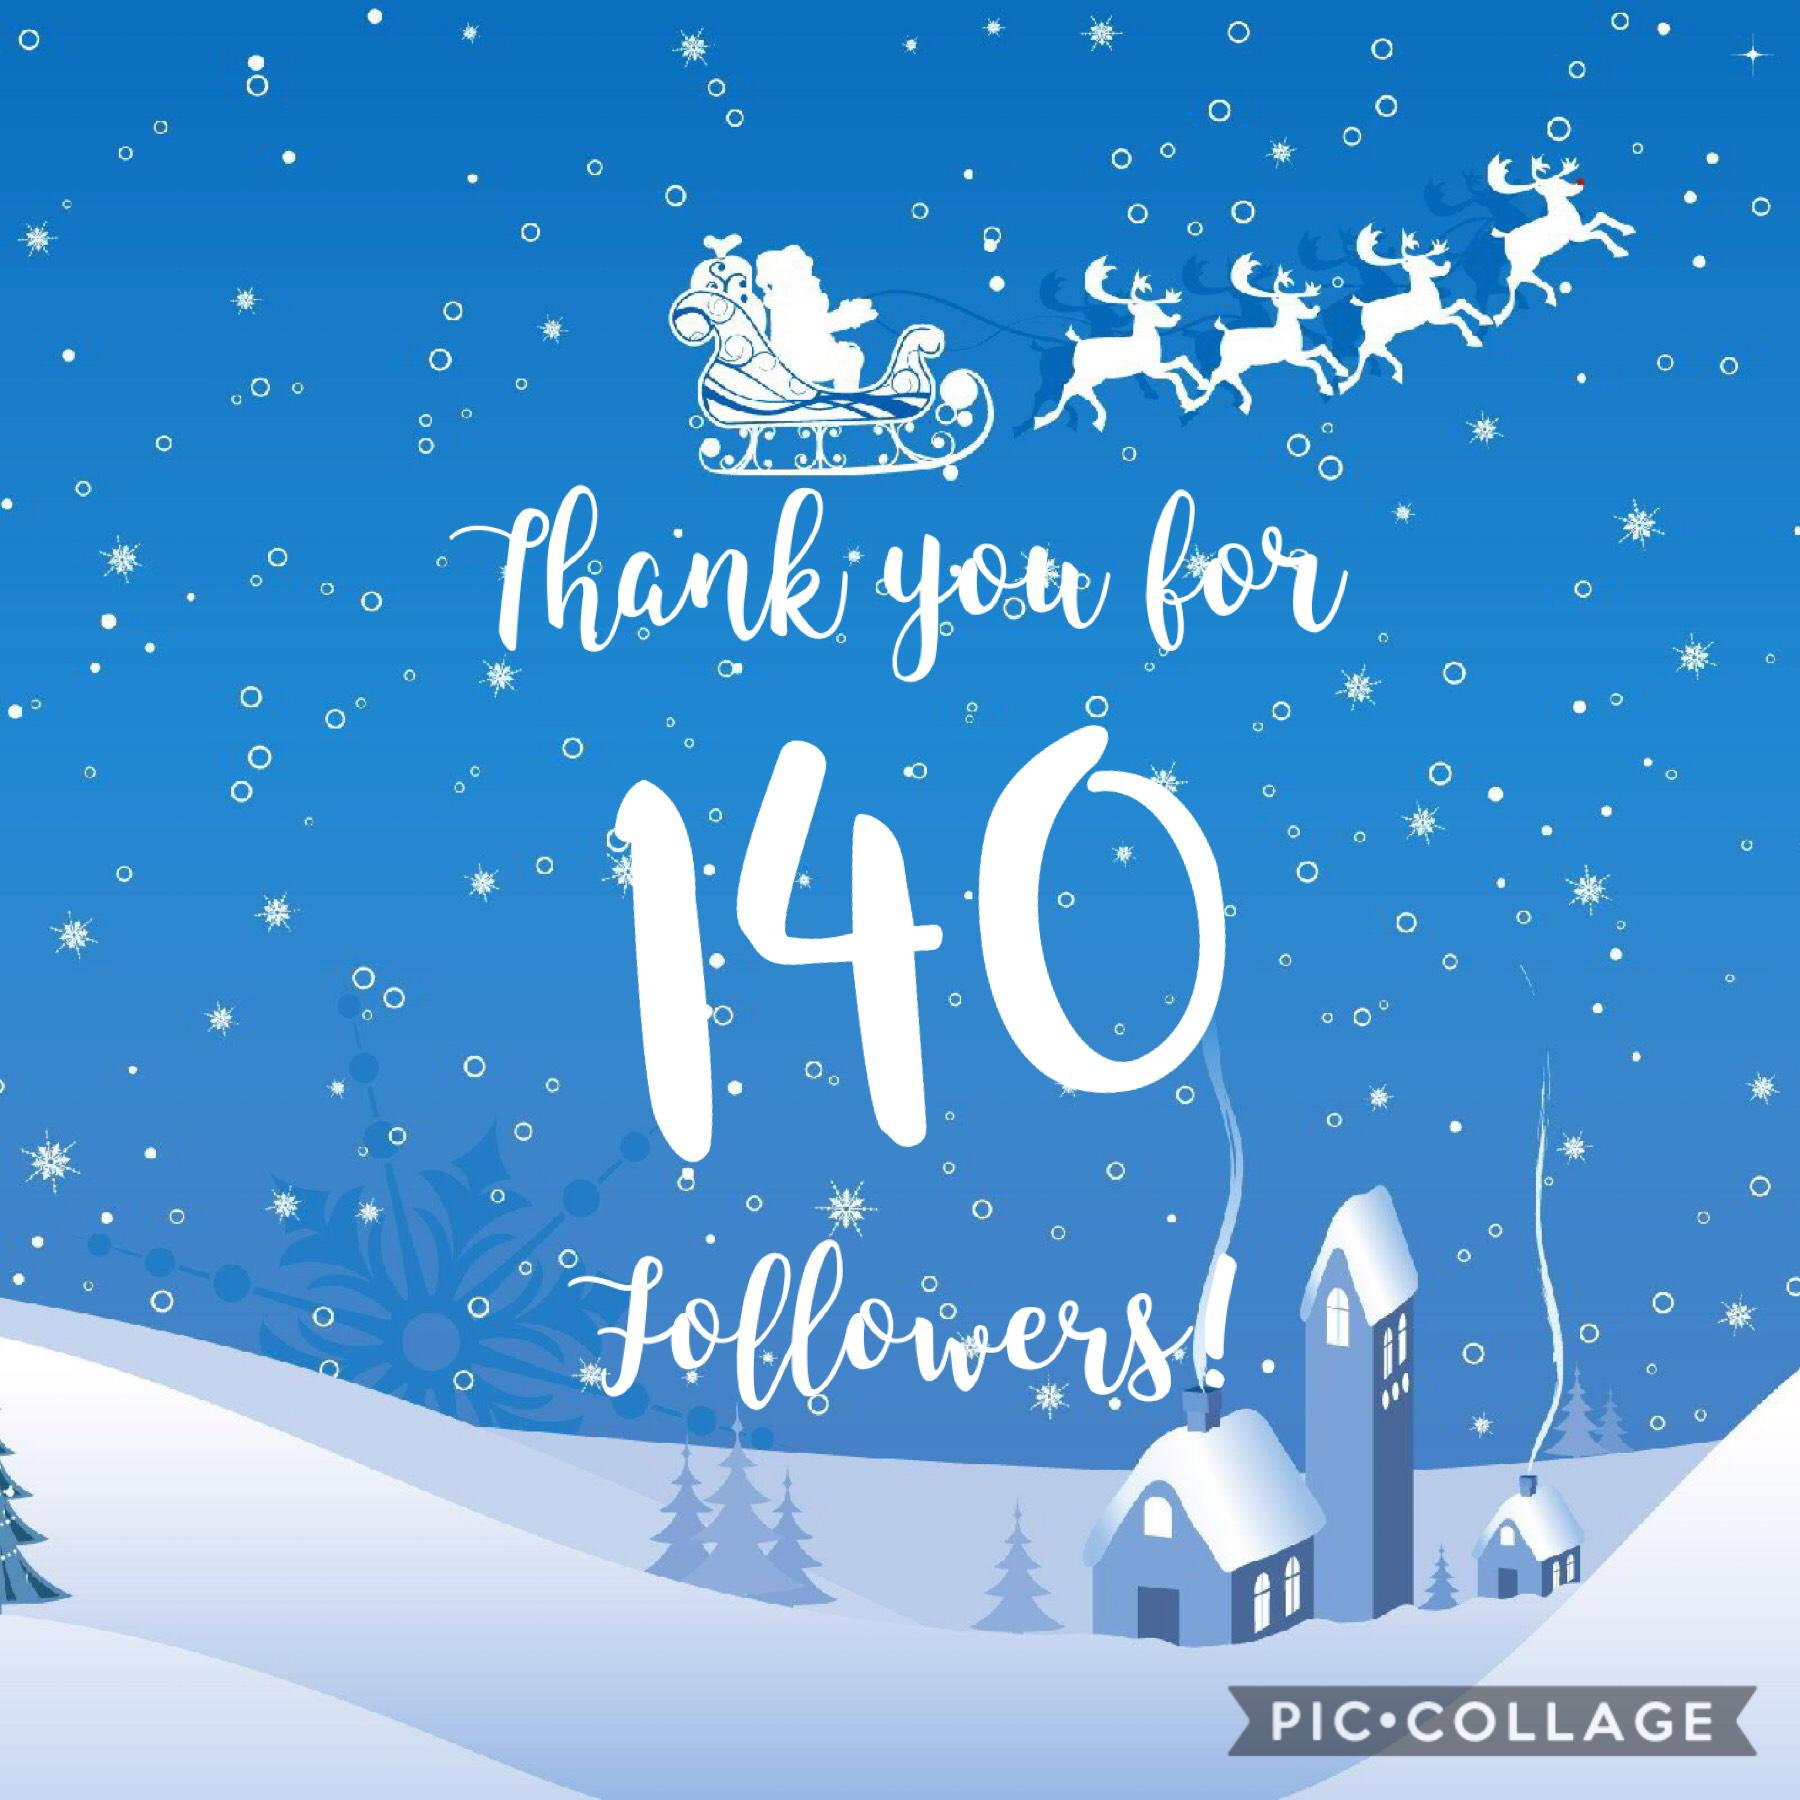 Thank you! Sorry that I havent posted for a while....😔🥳🤩